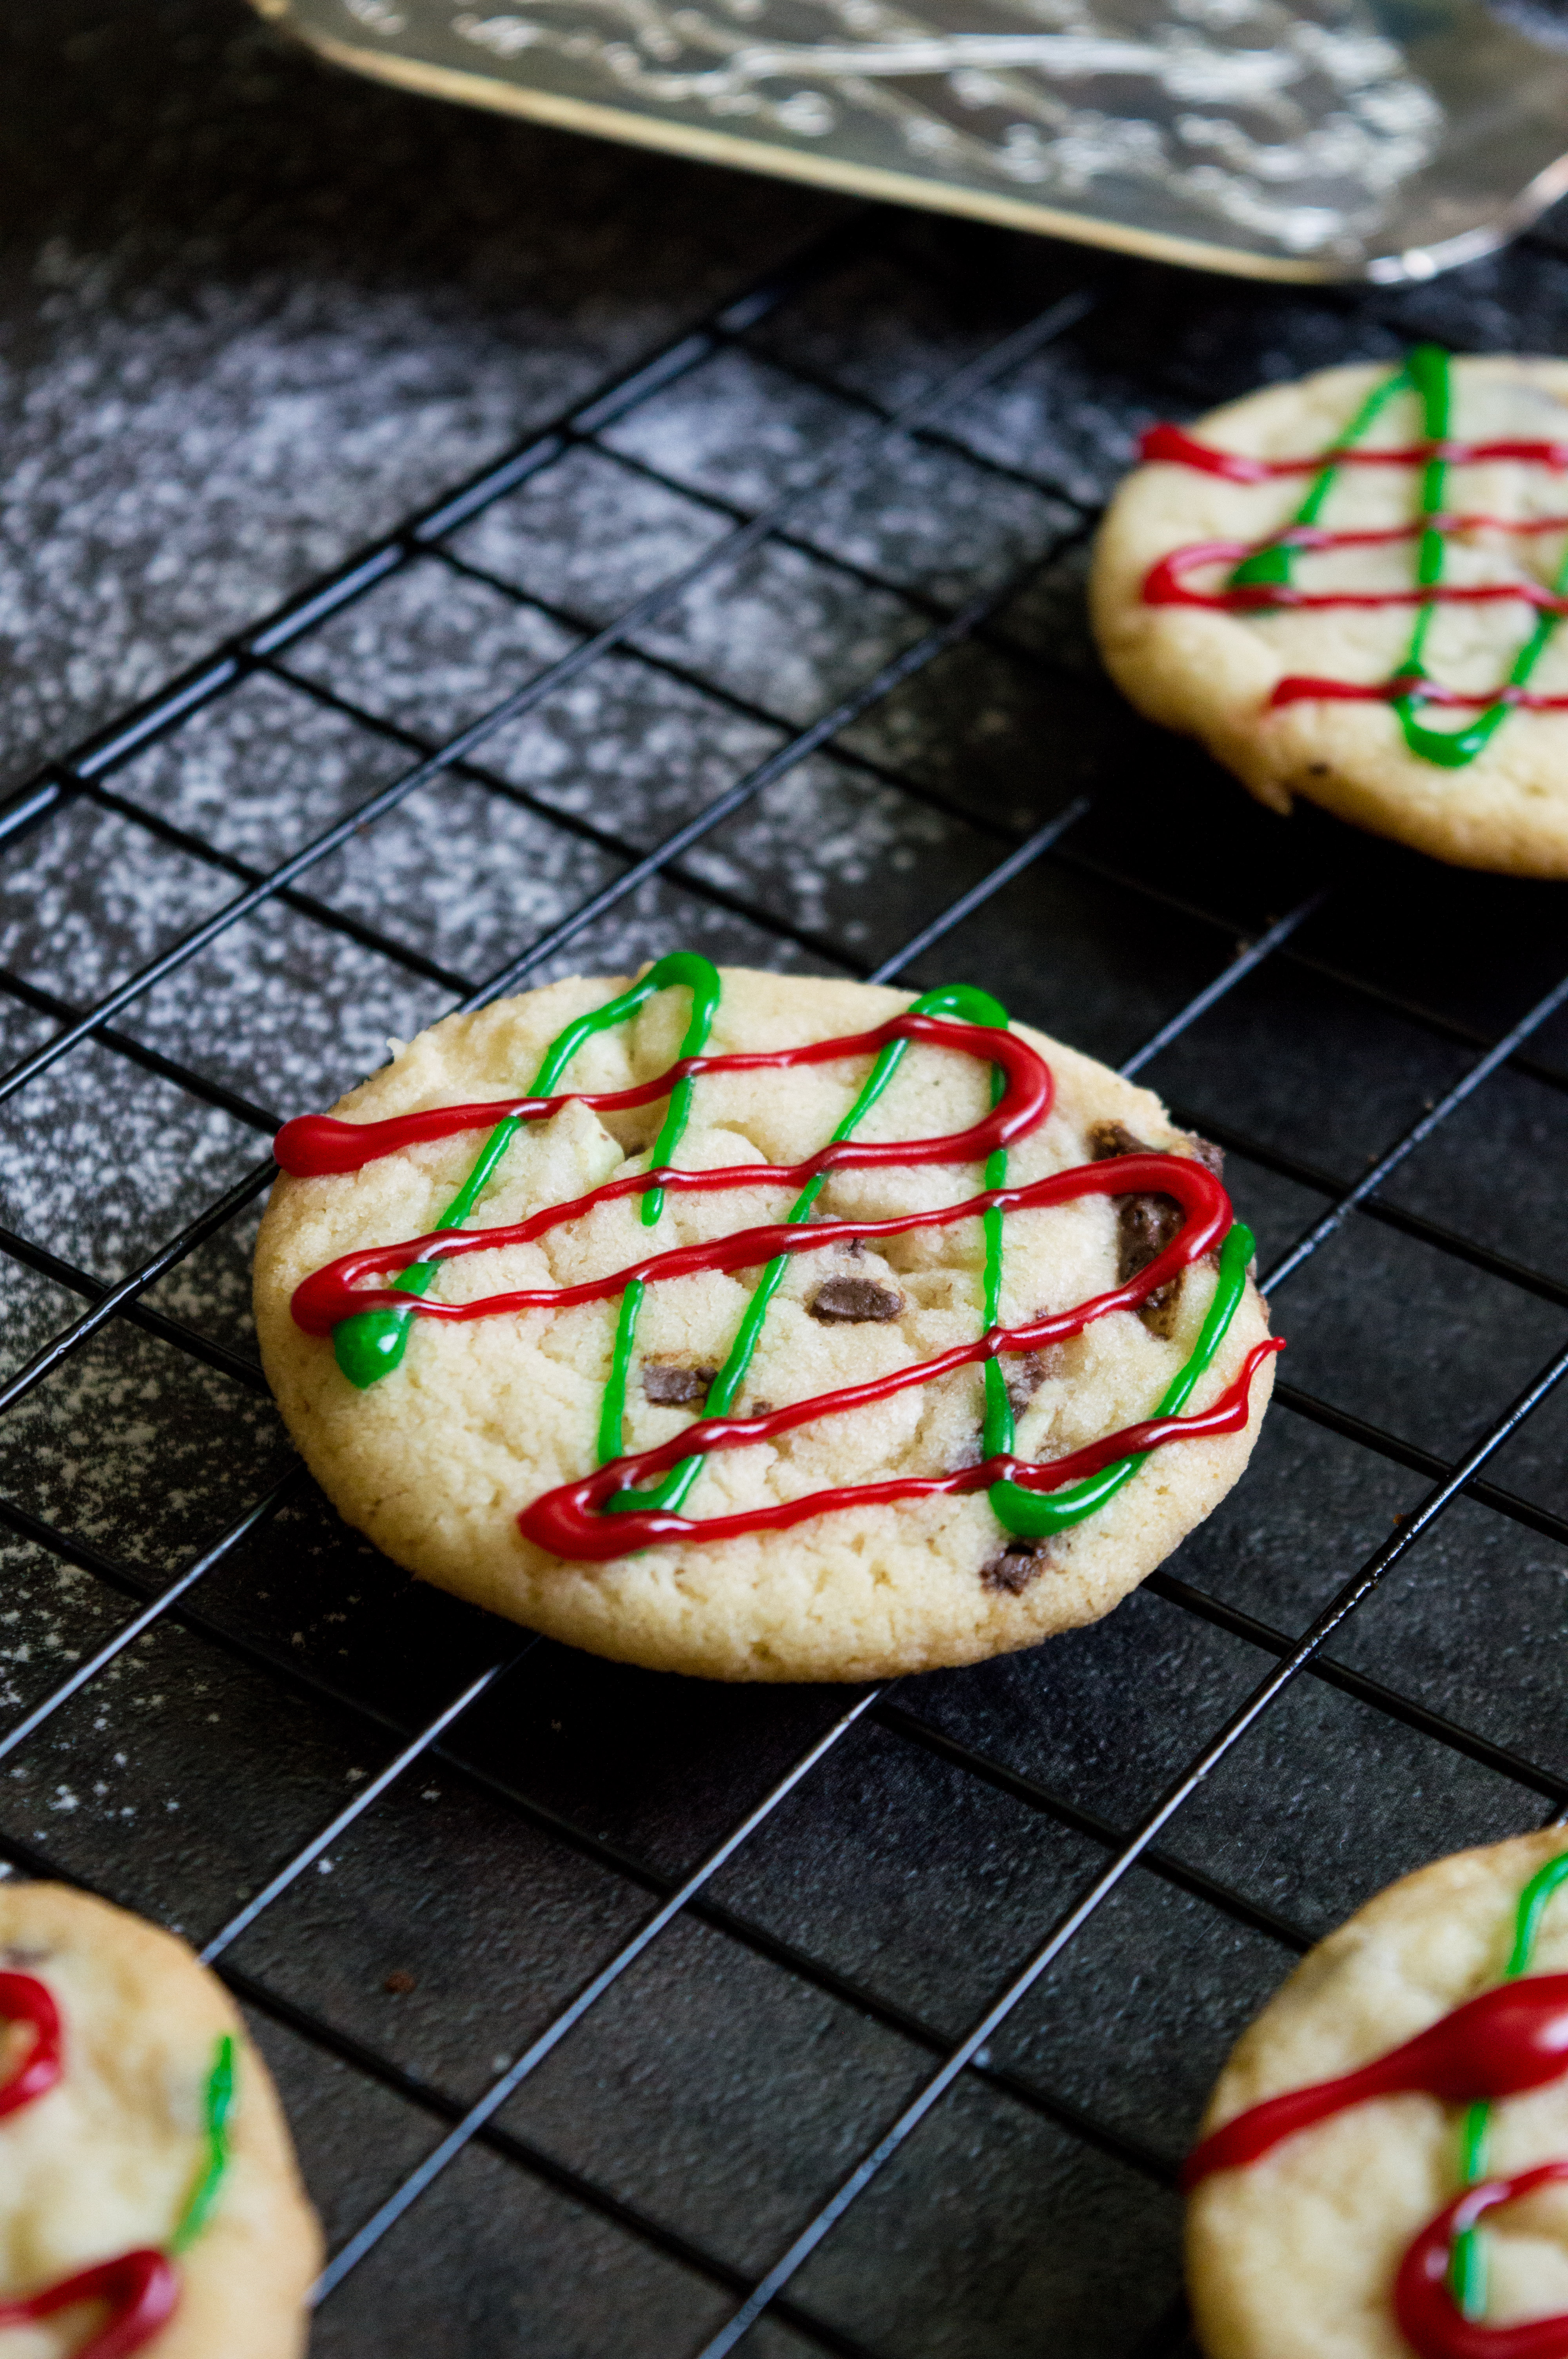 Looking for an amazing sugar cookie recipe? This mint sugar cookies recipe is out of this world. Perfect Christmas cookies, chocolate mint sugar cookies taste fantastic. These mint sugar cookies have Andes candies in the mix. #cookies #Christmas #Mint #Chocolate